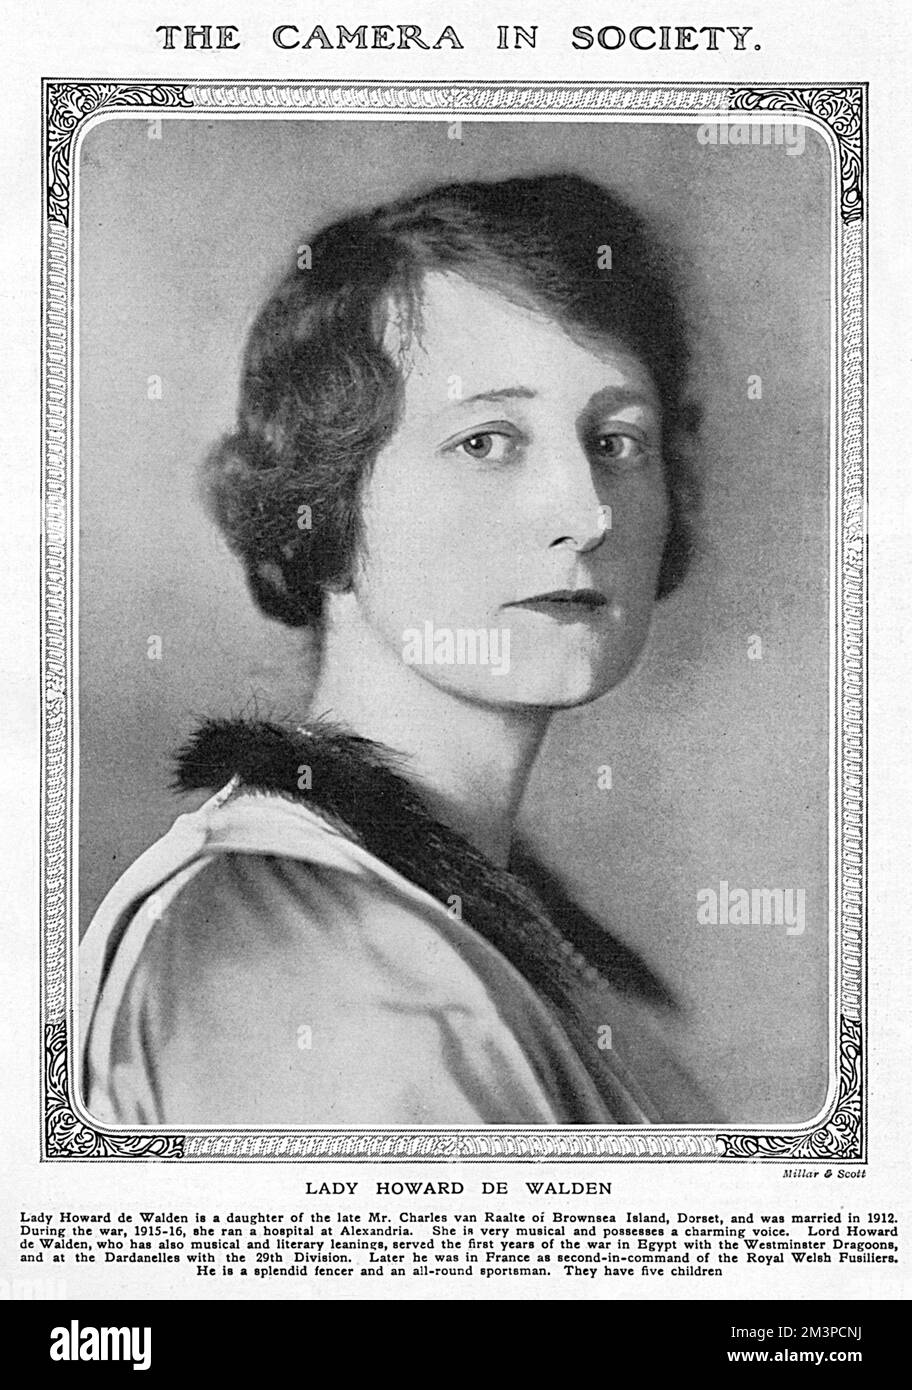 Lady Howard de Walden, formerly Margherita van Raalte before her marriage, founder and President of Queen Charlotte's Ball, the highlight of the debutante season. She revived Queen Charlotte's Ball in 1925. Pictured in The Tatler in 1920.  The magazine describes her as very musical and 'possesses a charming voice' and reminds readers that she has five children.  During the First World War she ran a hospital in Alexandria between 1915-16. Stock Photo